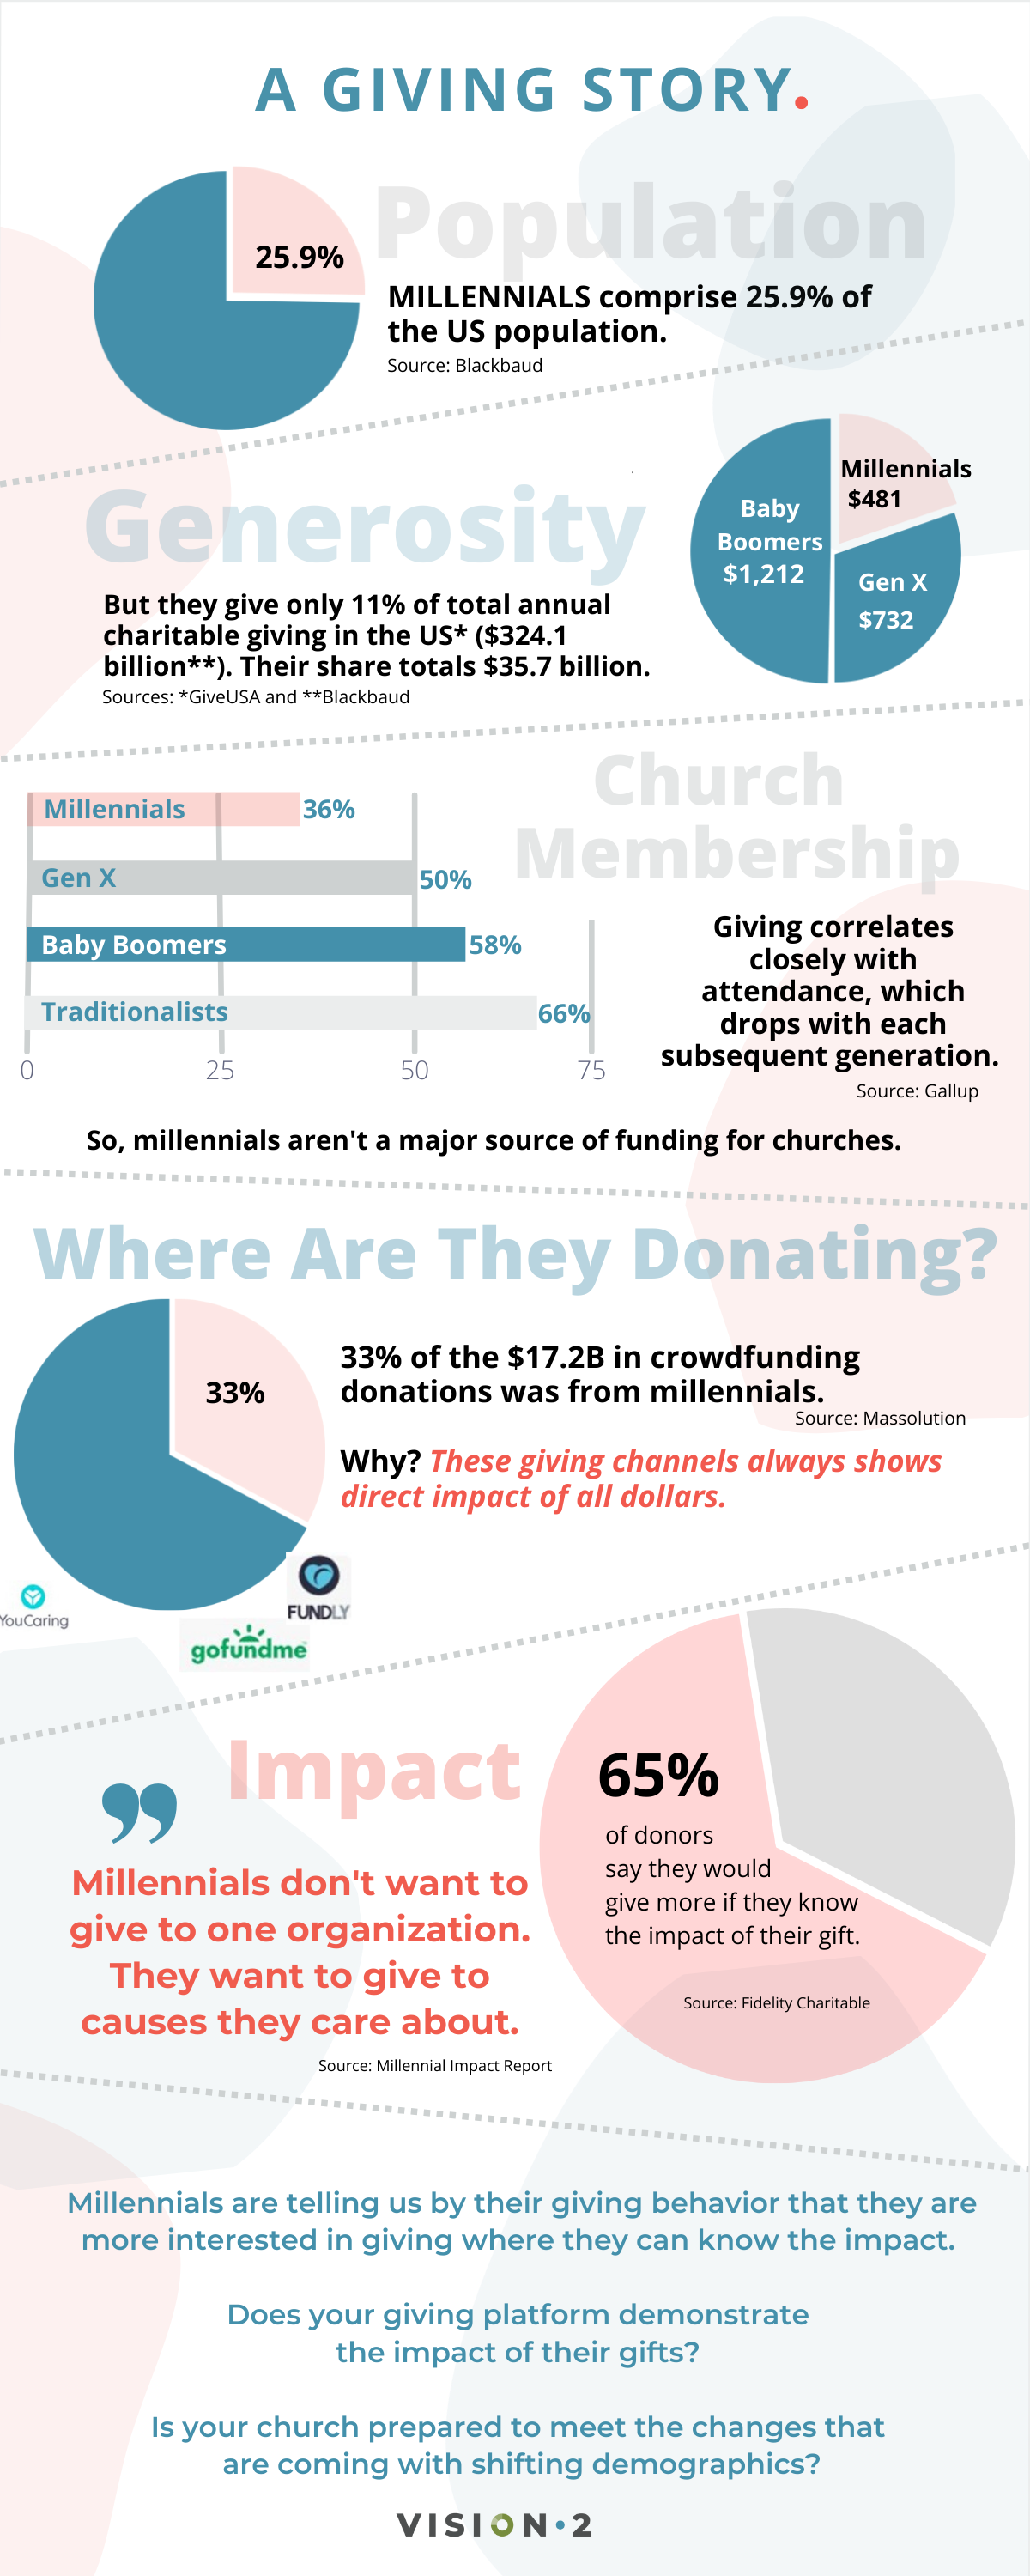 What Drives Millennial Giving?